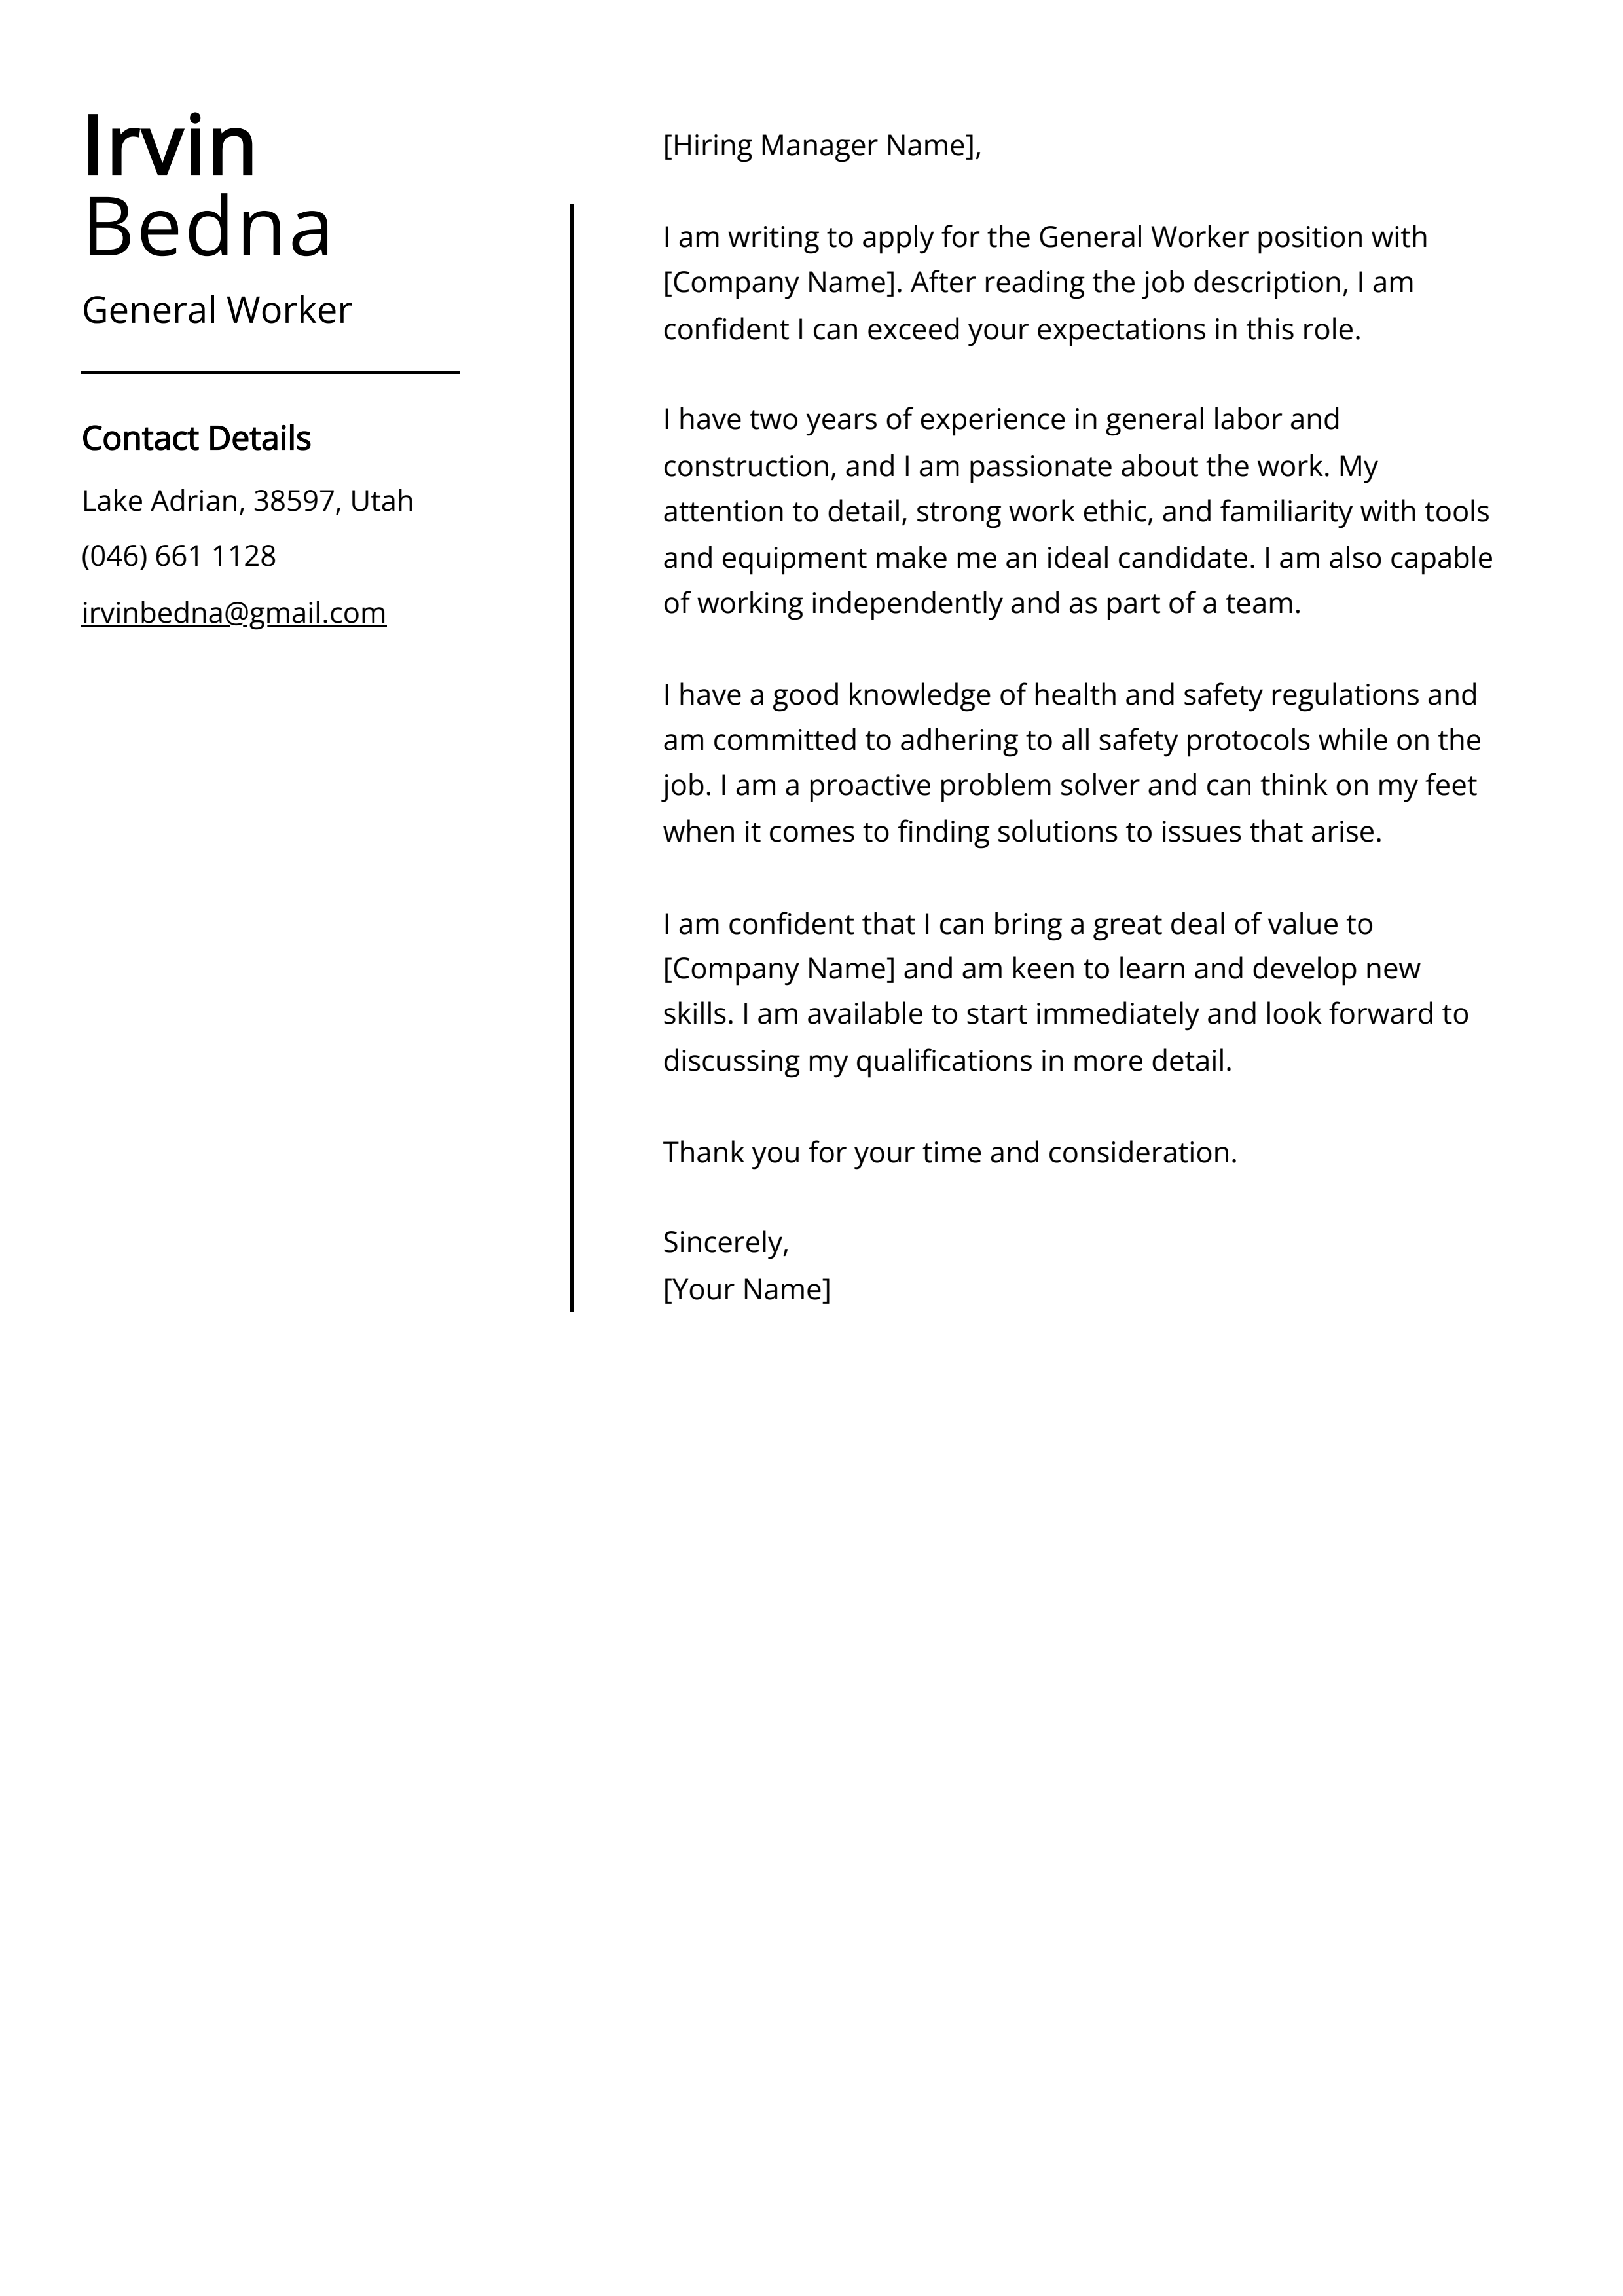 General Worker Cover Letter Example